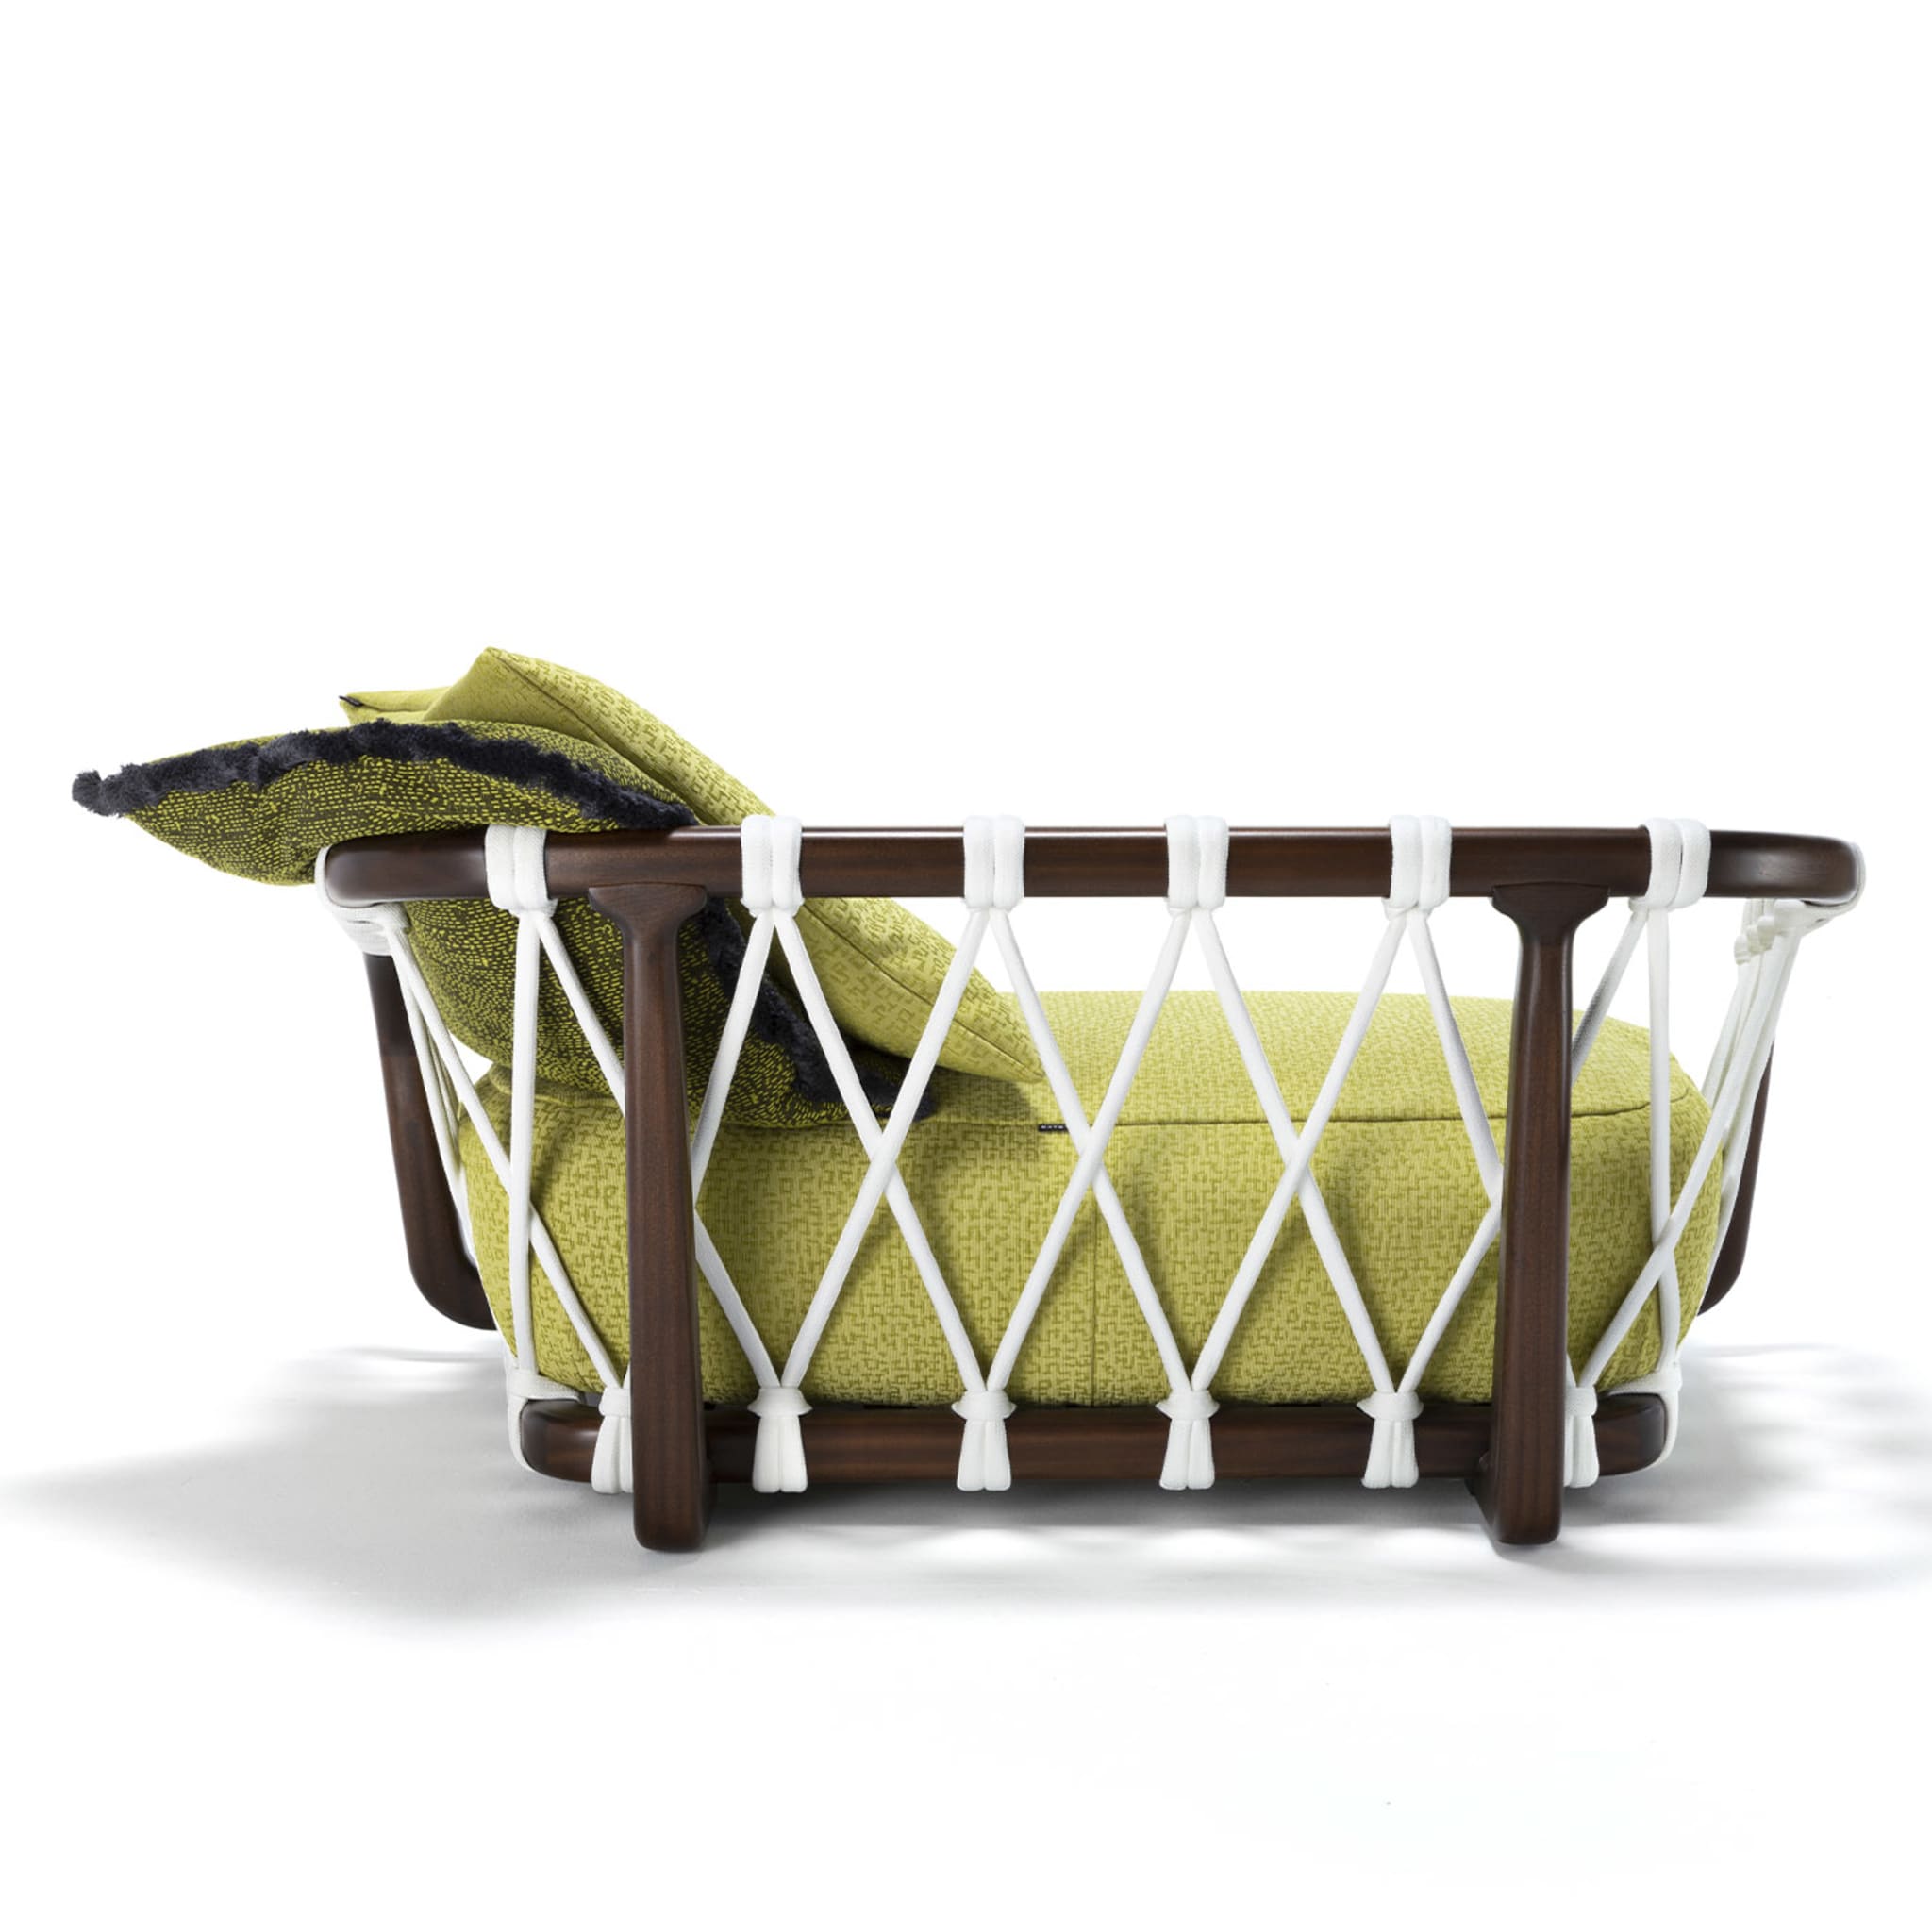 Sunset Basket Small Barrique + Green Sofa by Paola Navone - Alternative view 1